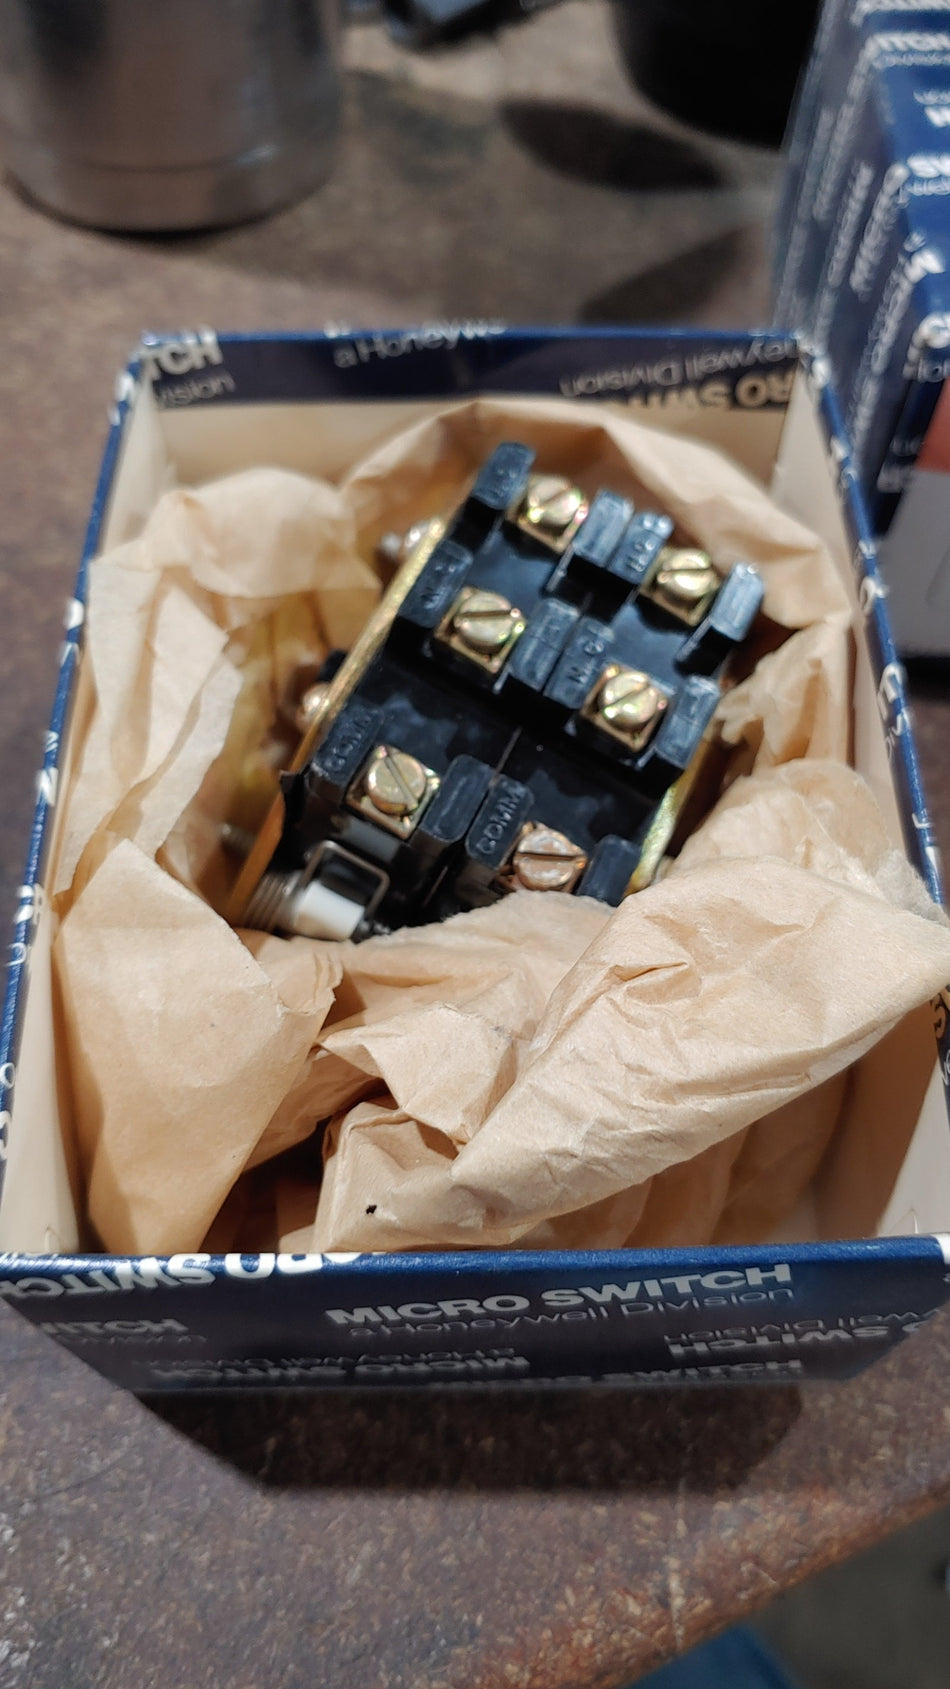 Honeywell 91CX5 switch only